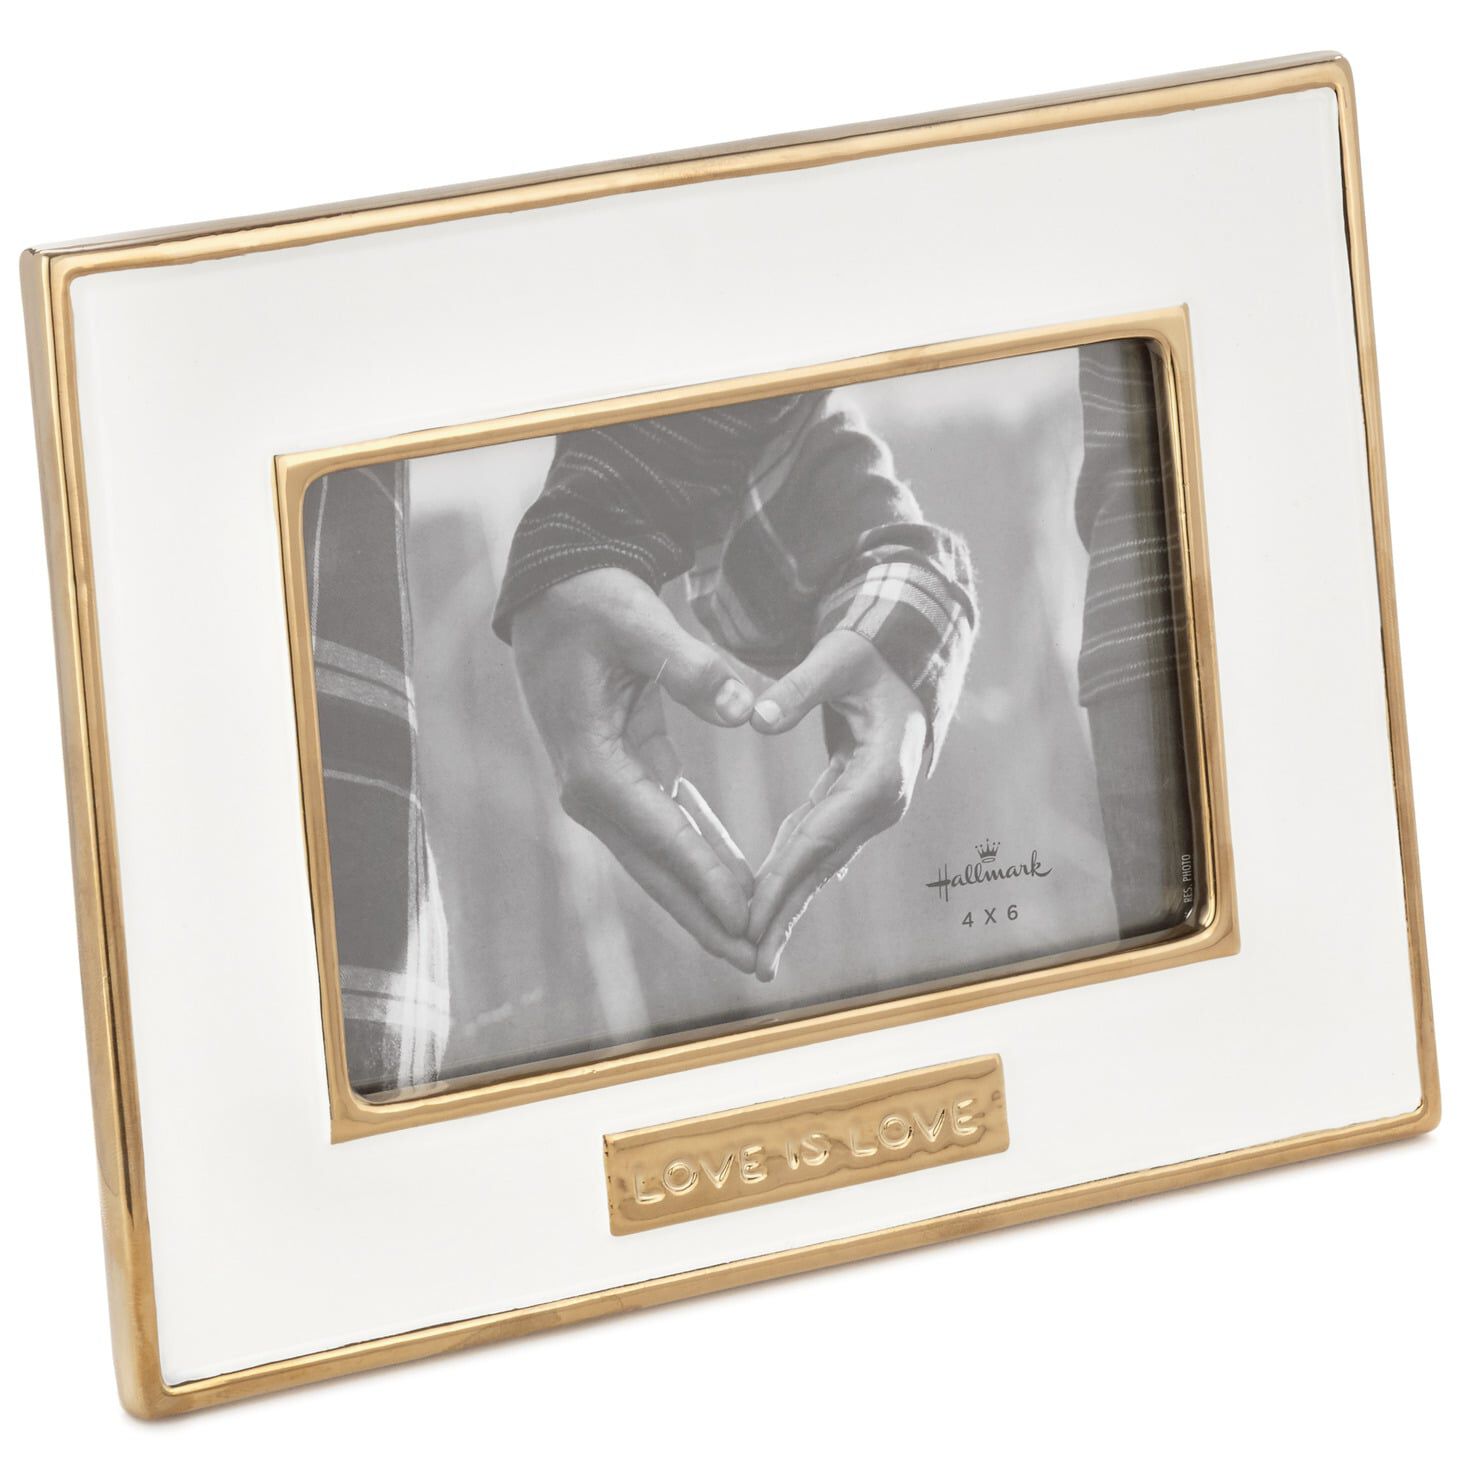 Details about   NEW Russ From the Heart Love Pink 4x6 Photo Frame 